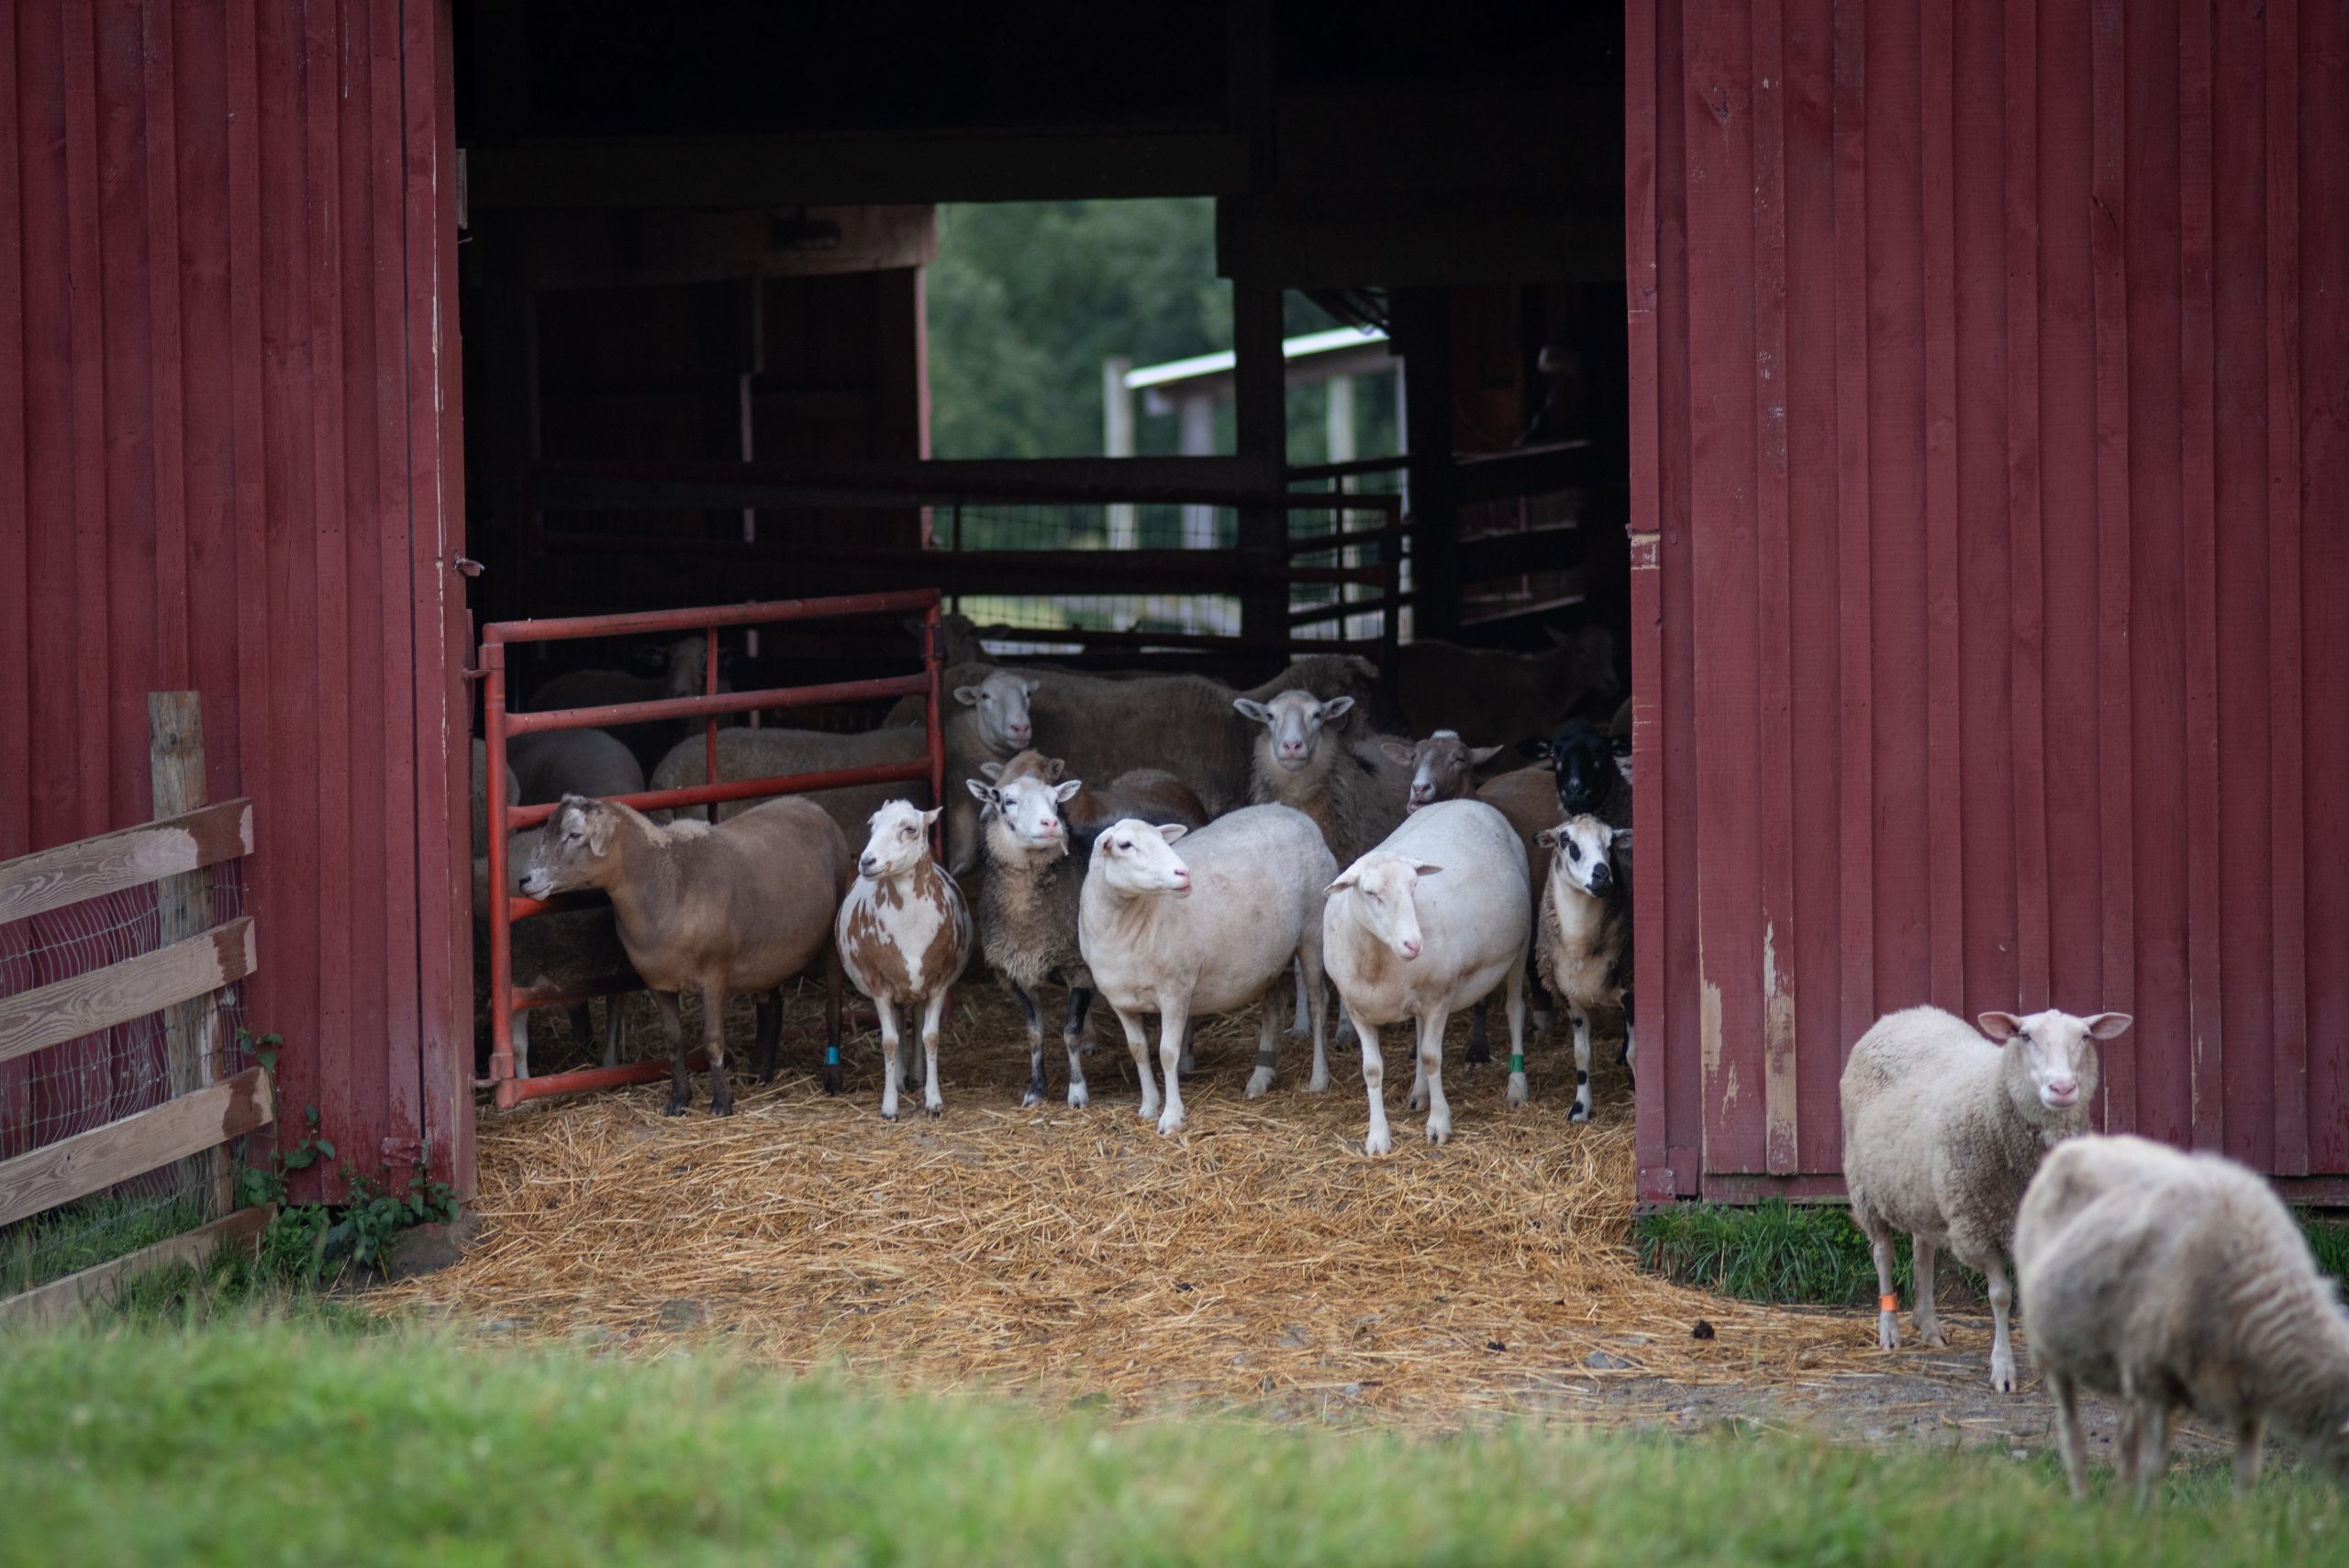 Vertical explainer photo 2 - Sheep standing in the barn doorway at Farm Sanctuary